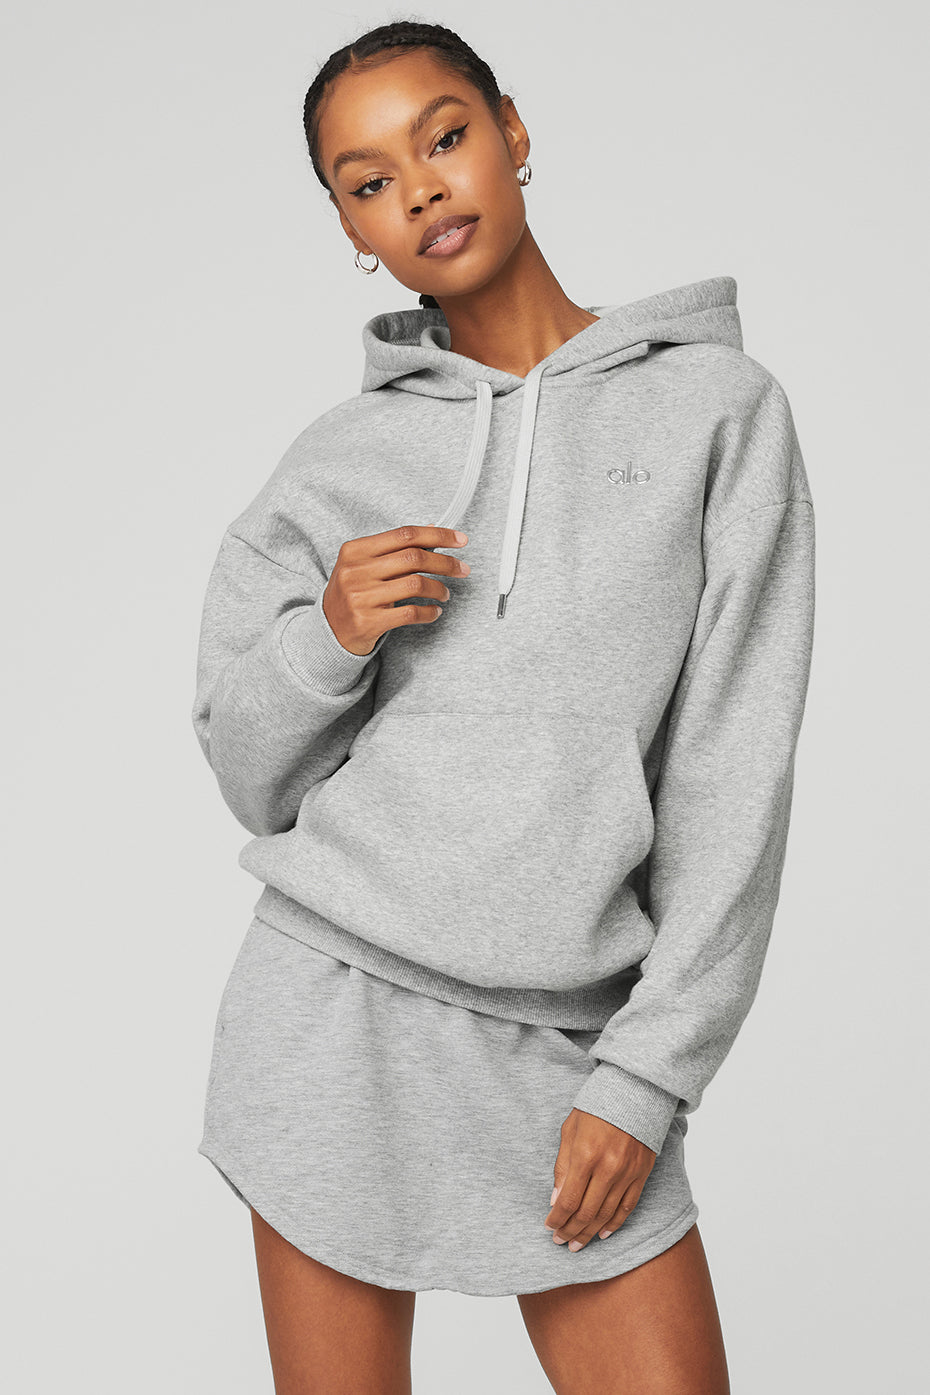 Accolade Hoodie in Athletic Heather Grey by Alo Yoga - Work Well Daily